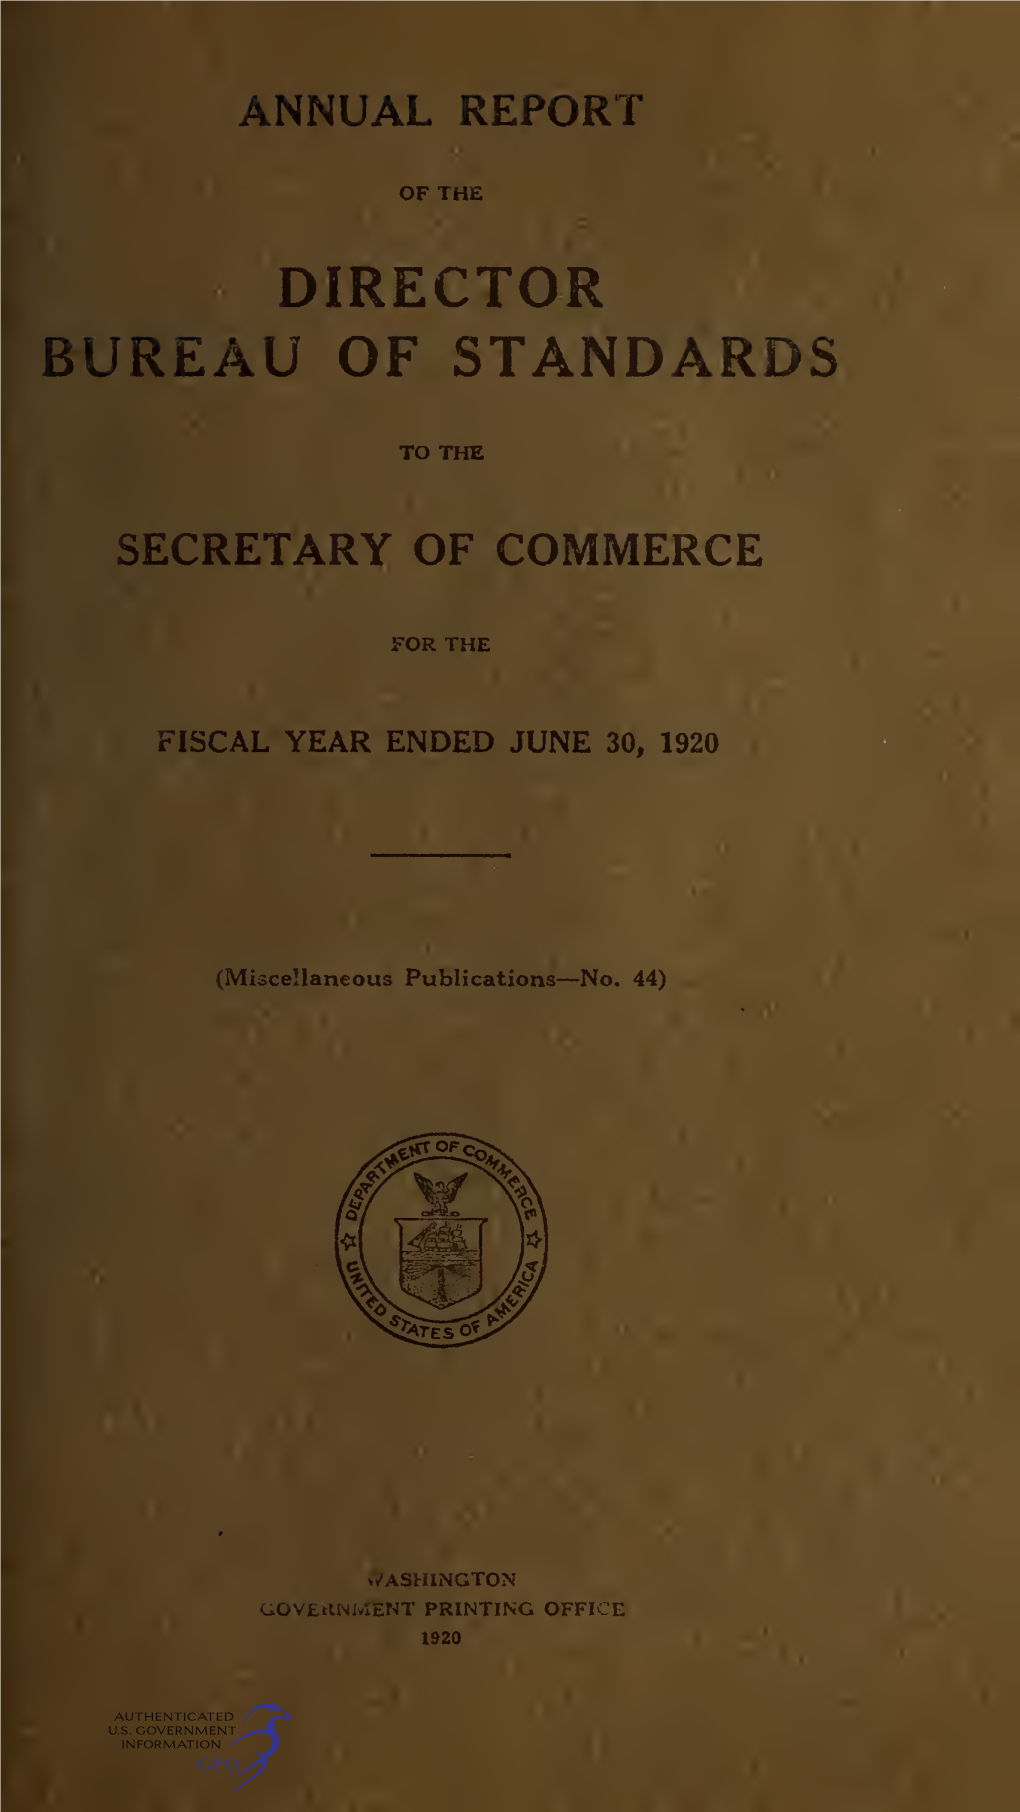 Annual Report of the Director Bureau of Standards to the Secretary of Commerce for the Fiscal Year Ended June 30, 1920